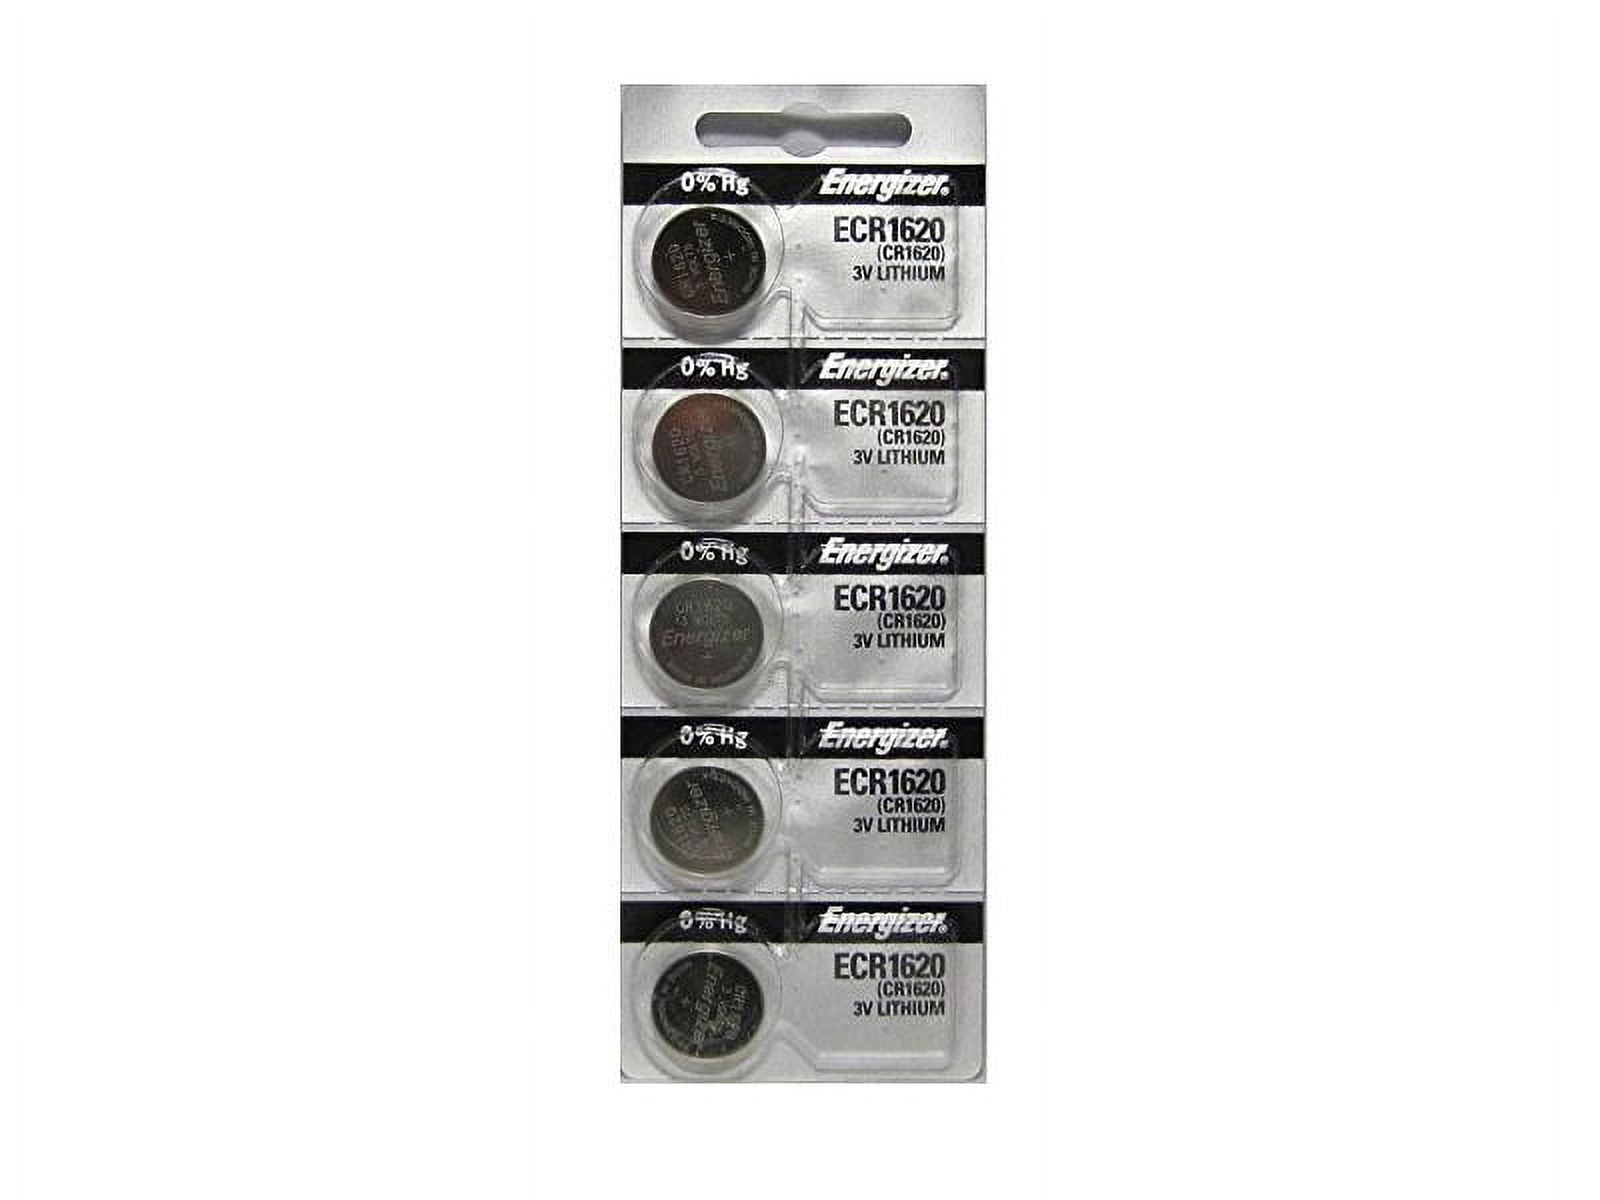 CR1620 - Batteries - Electrical - The Home Depot